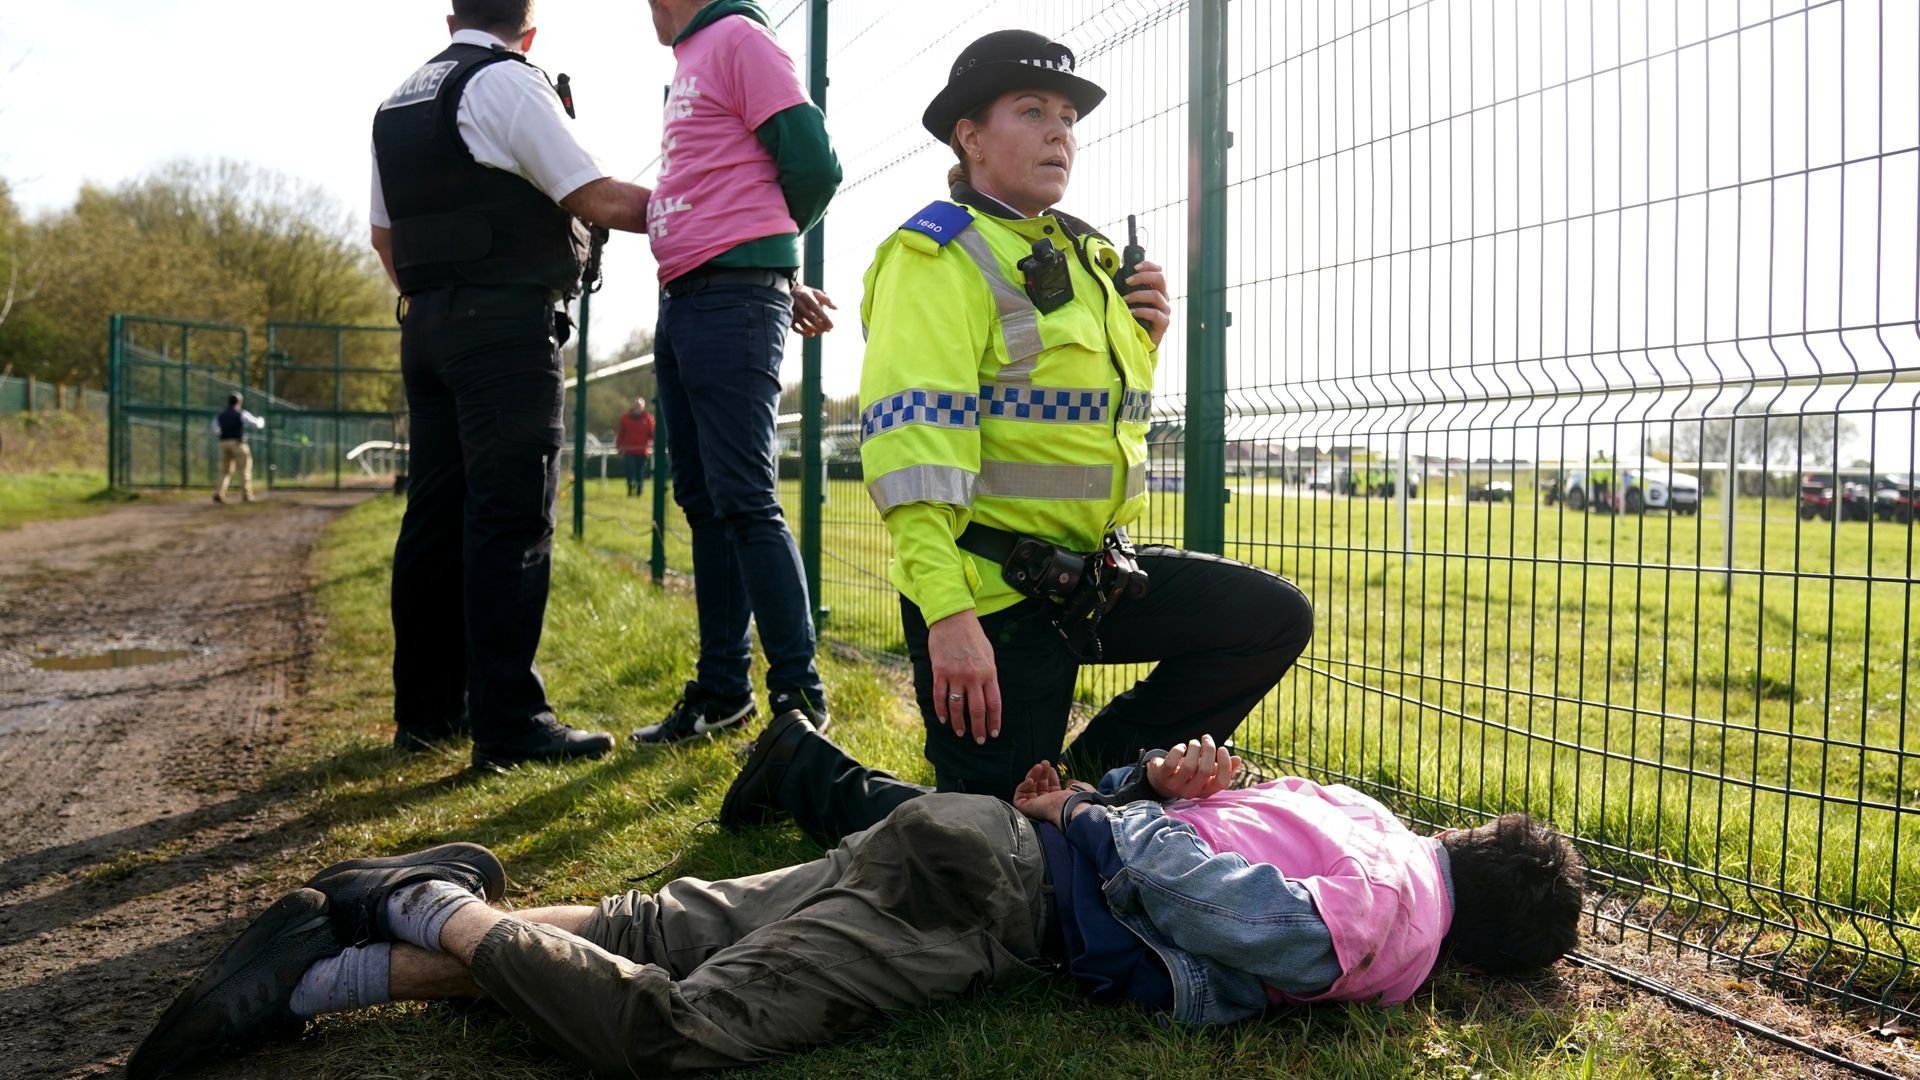 Epsom officials on alert for possible Derby protests